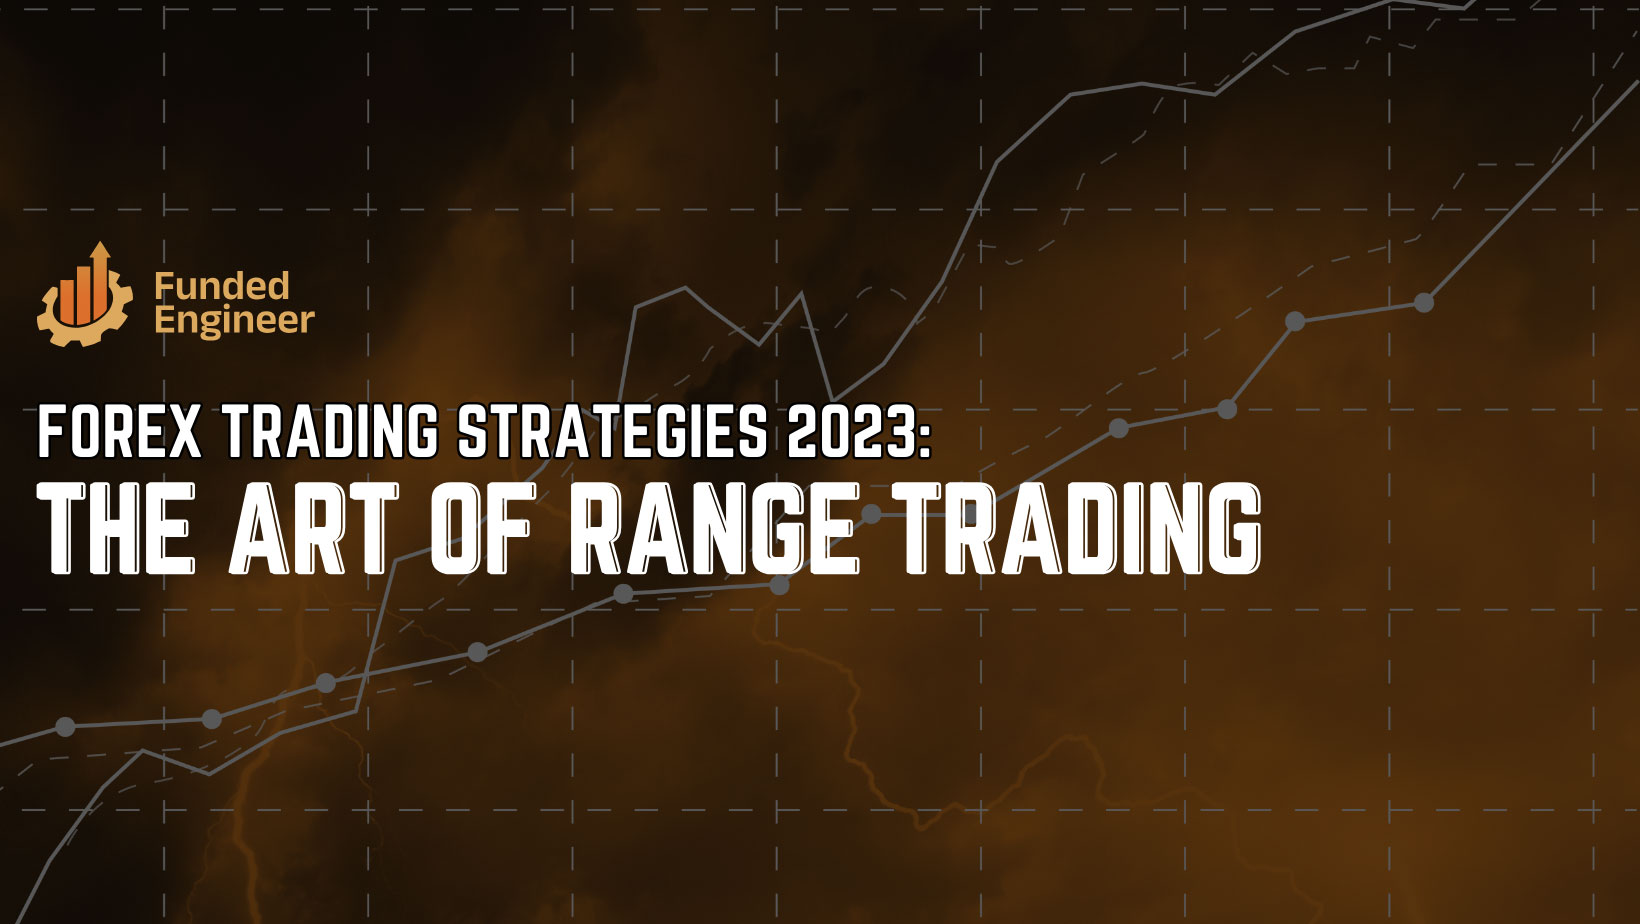 cover image for blog "Forex Trading Strategies 2023: The Art of Range Trading"